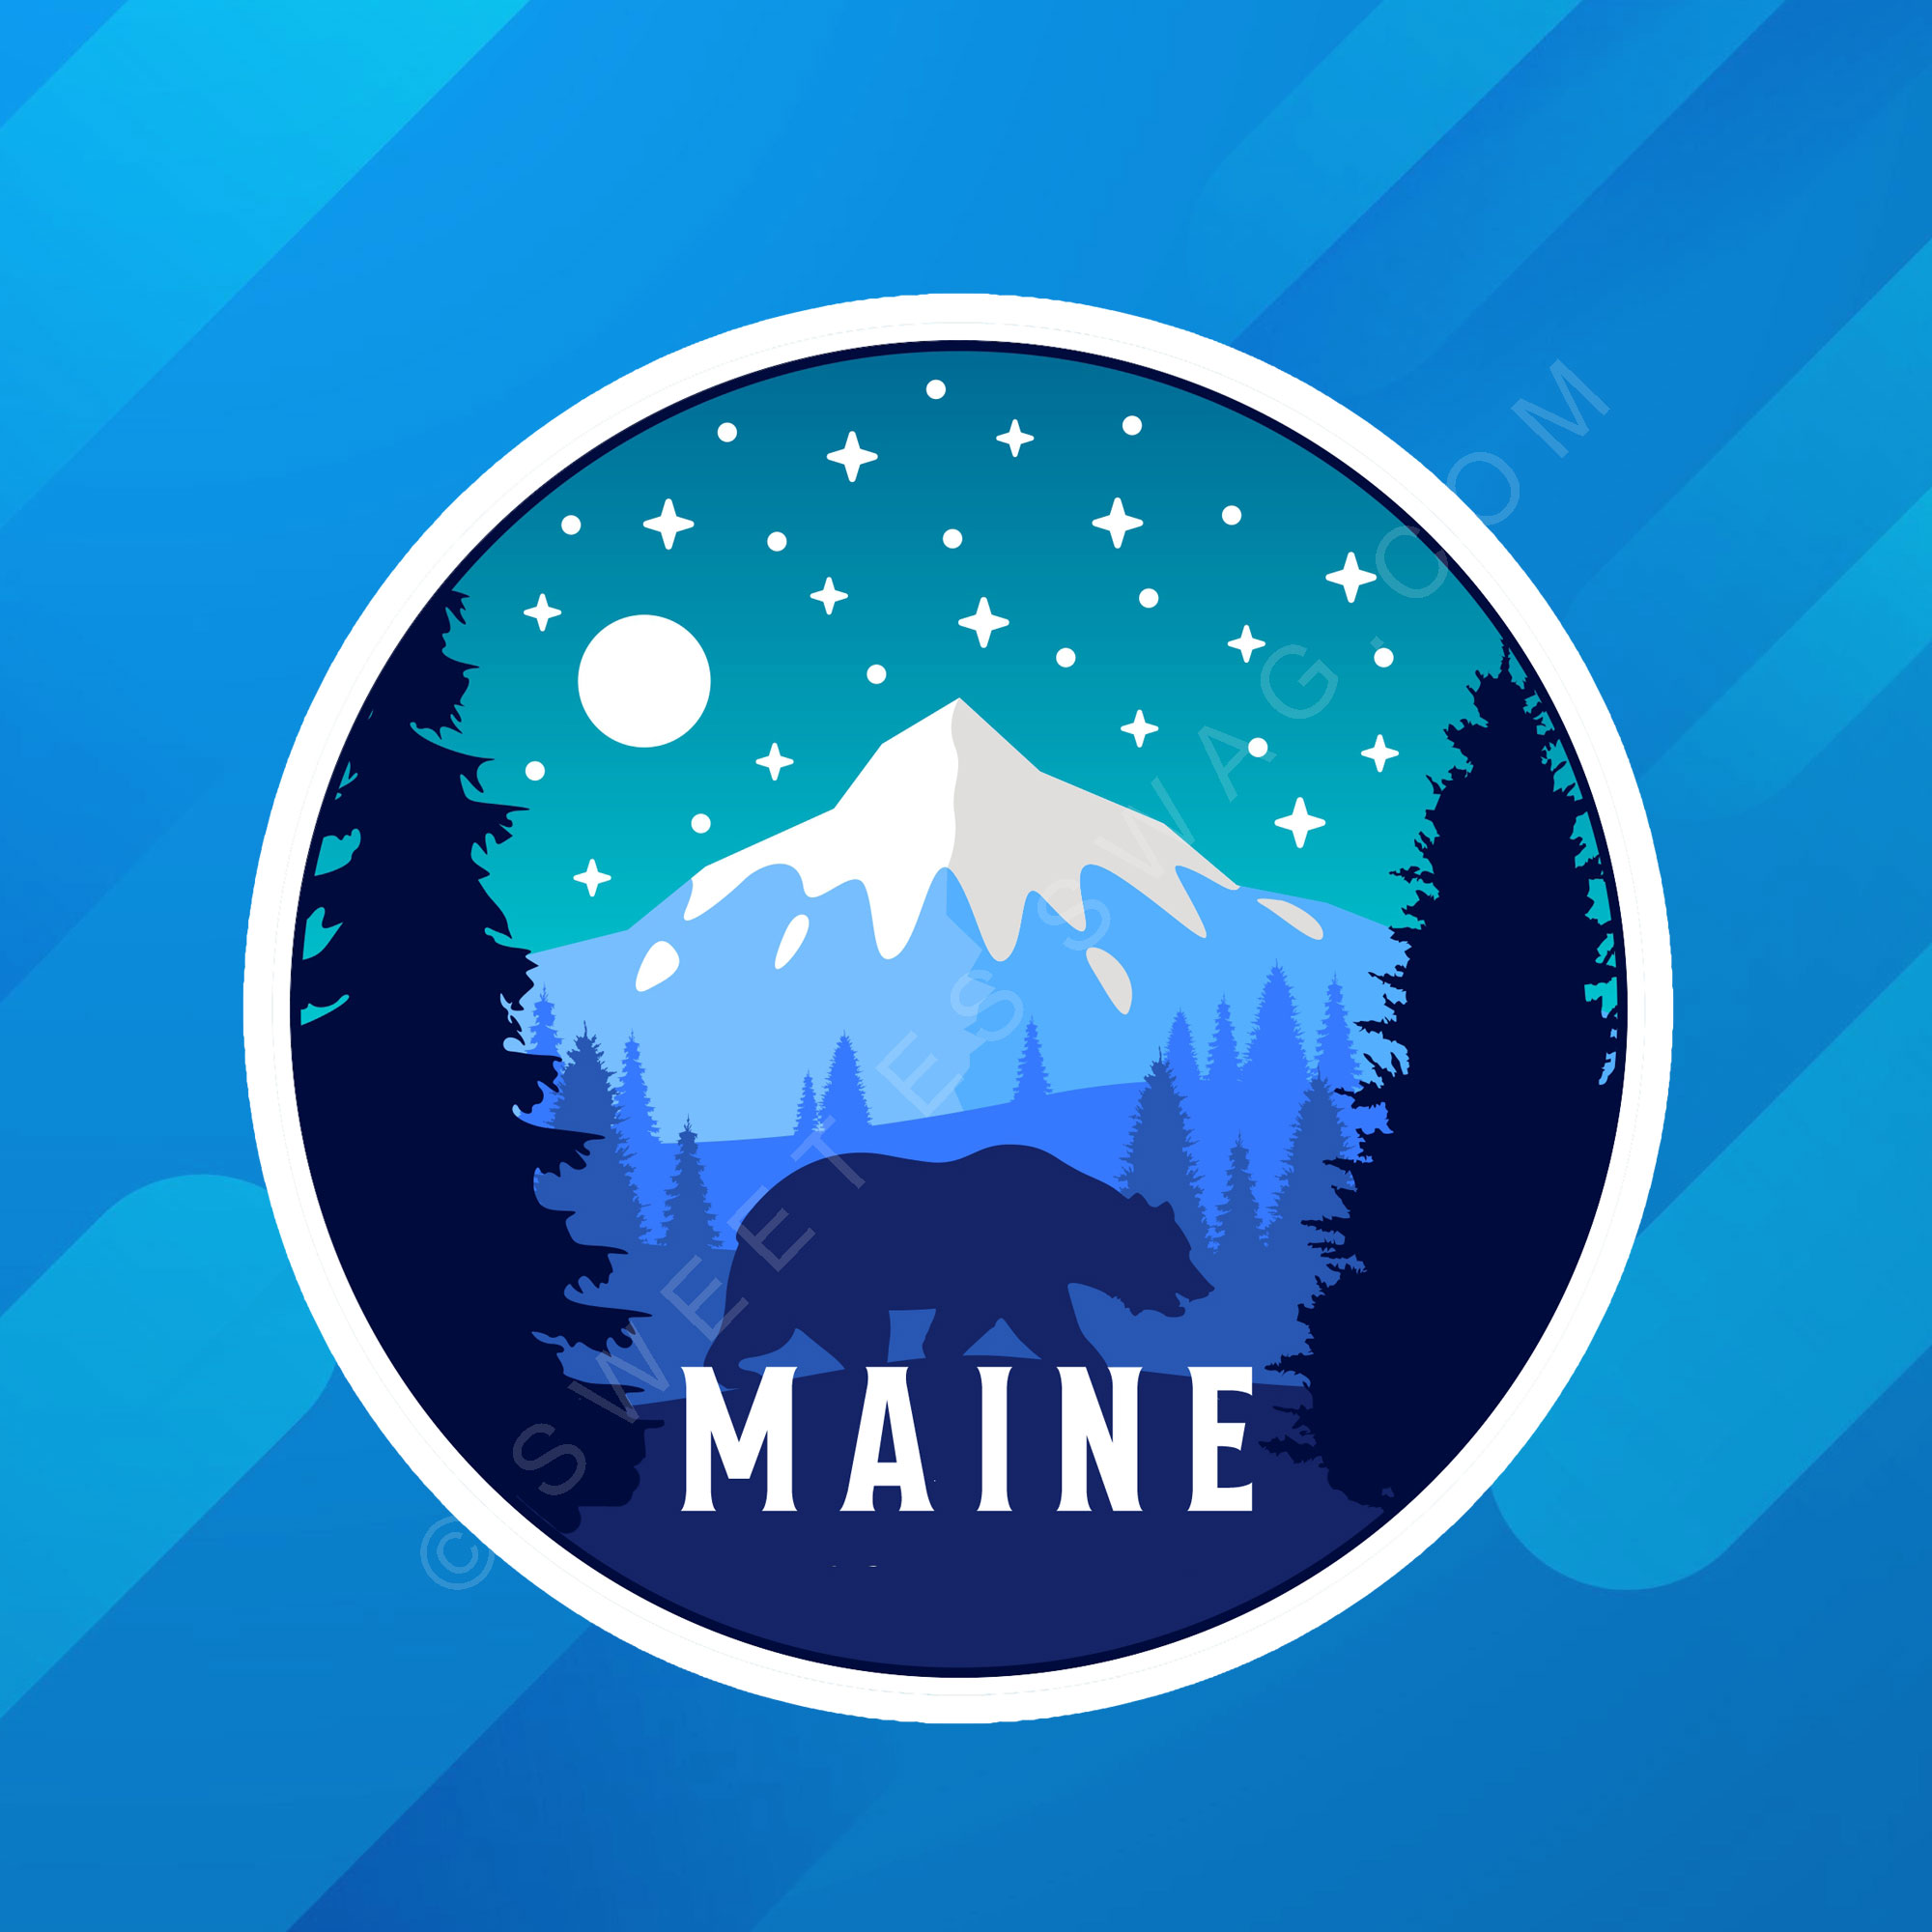 Maine Mountains Laptop Water Bottle Stickers